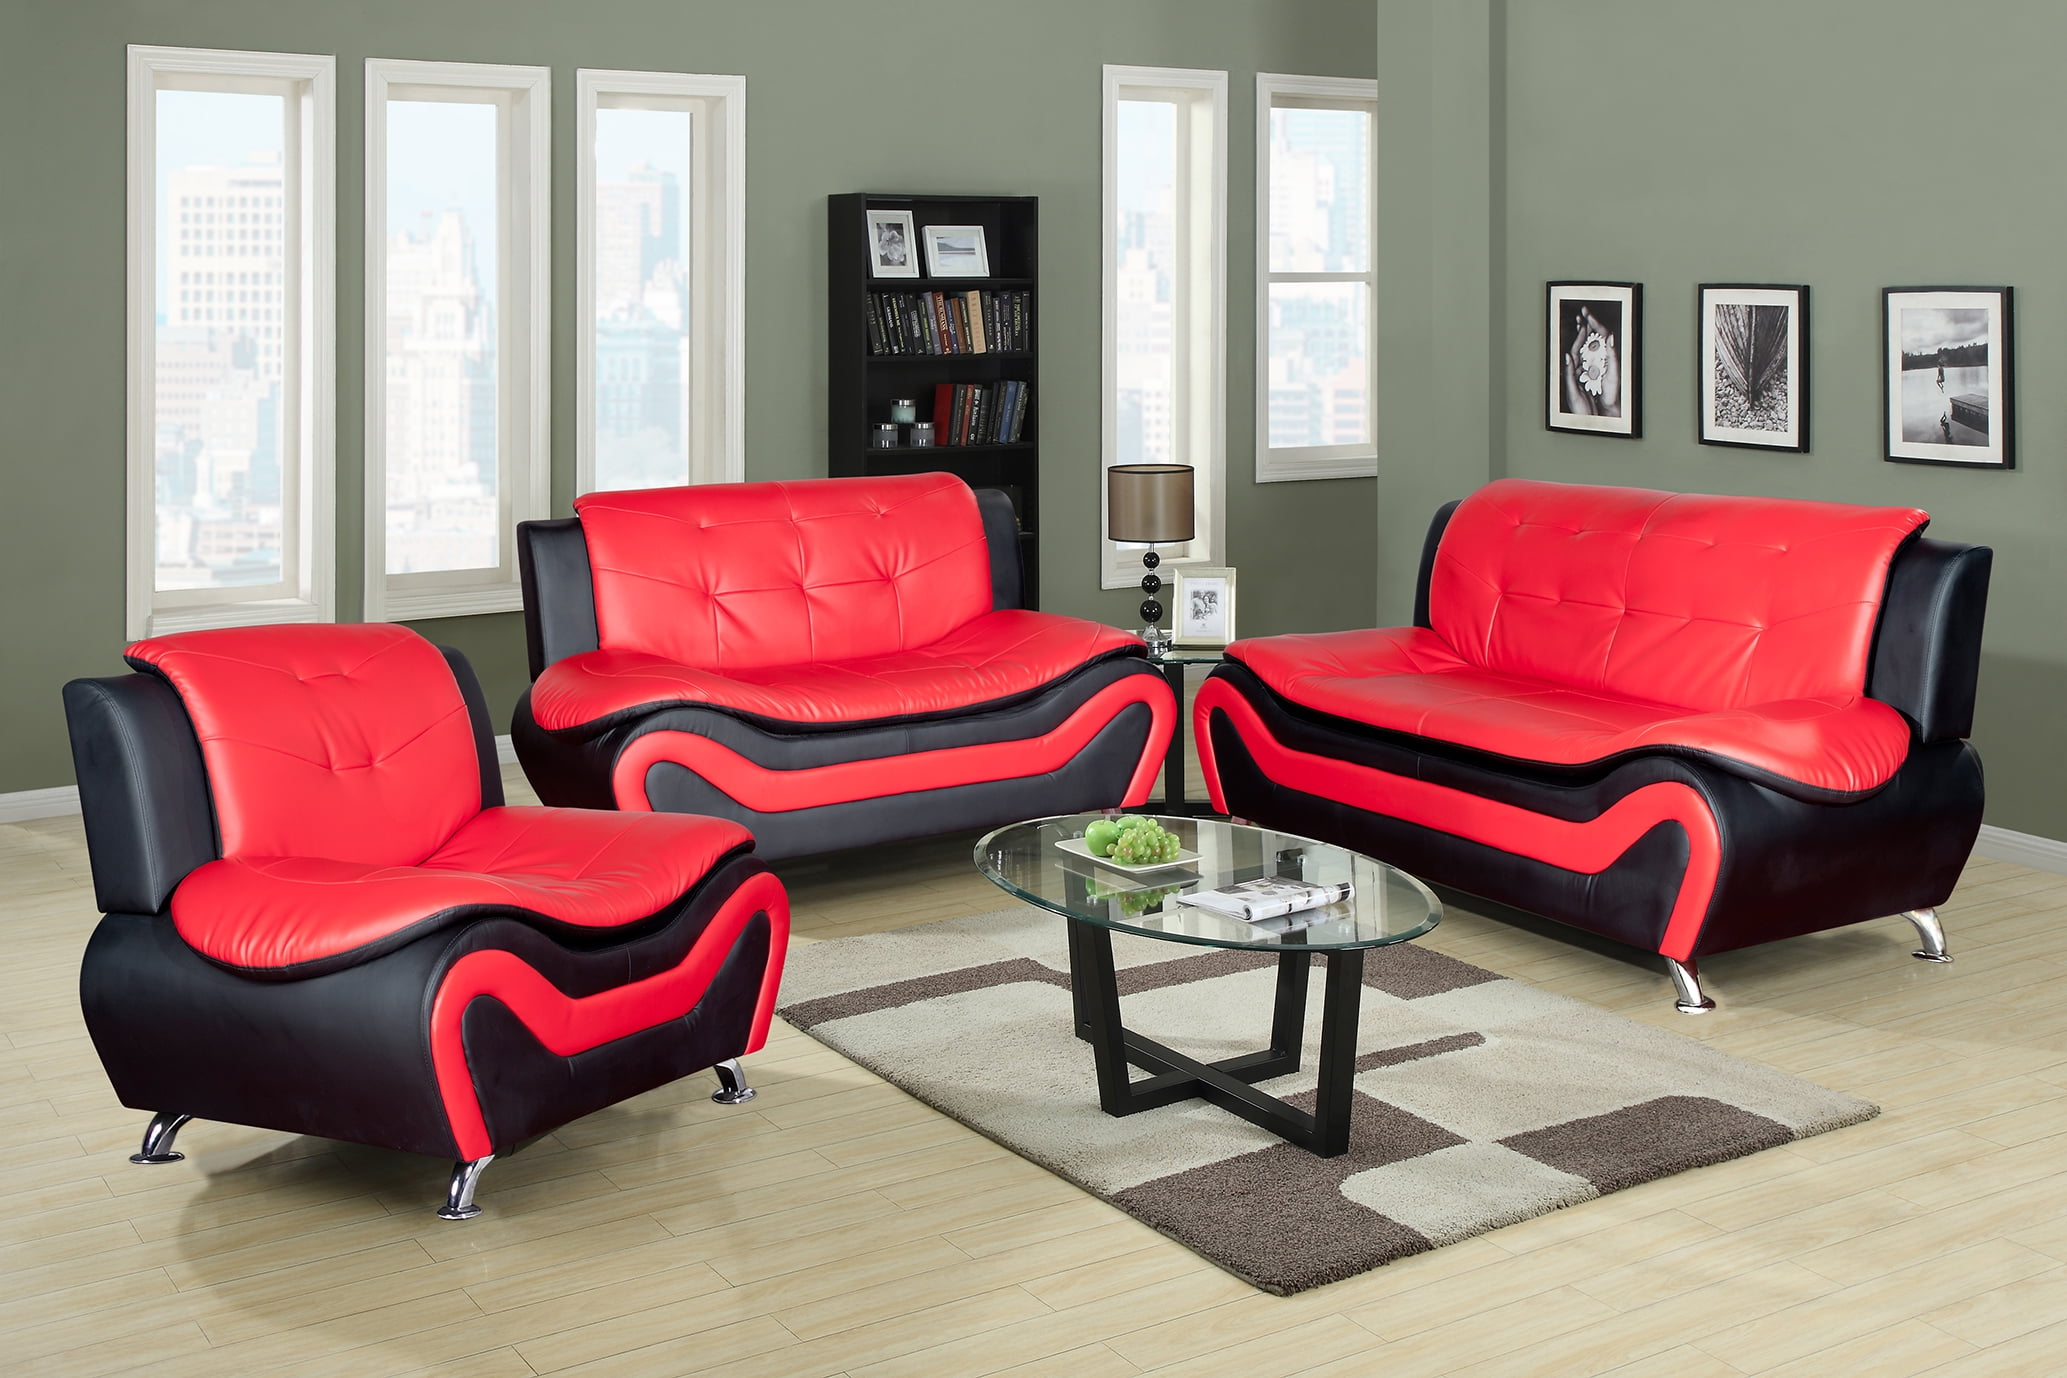 3 Piece Sofa Loveseat Chair, Red Leather Couch And Loveseat